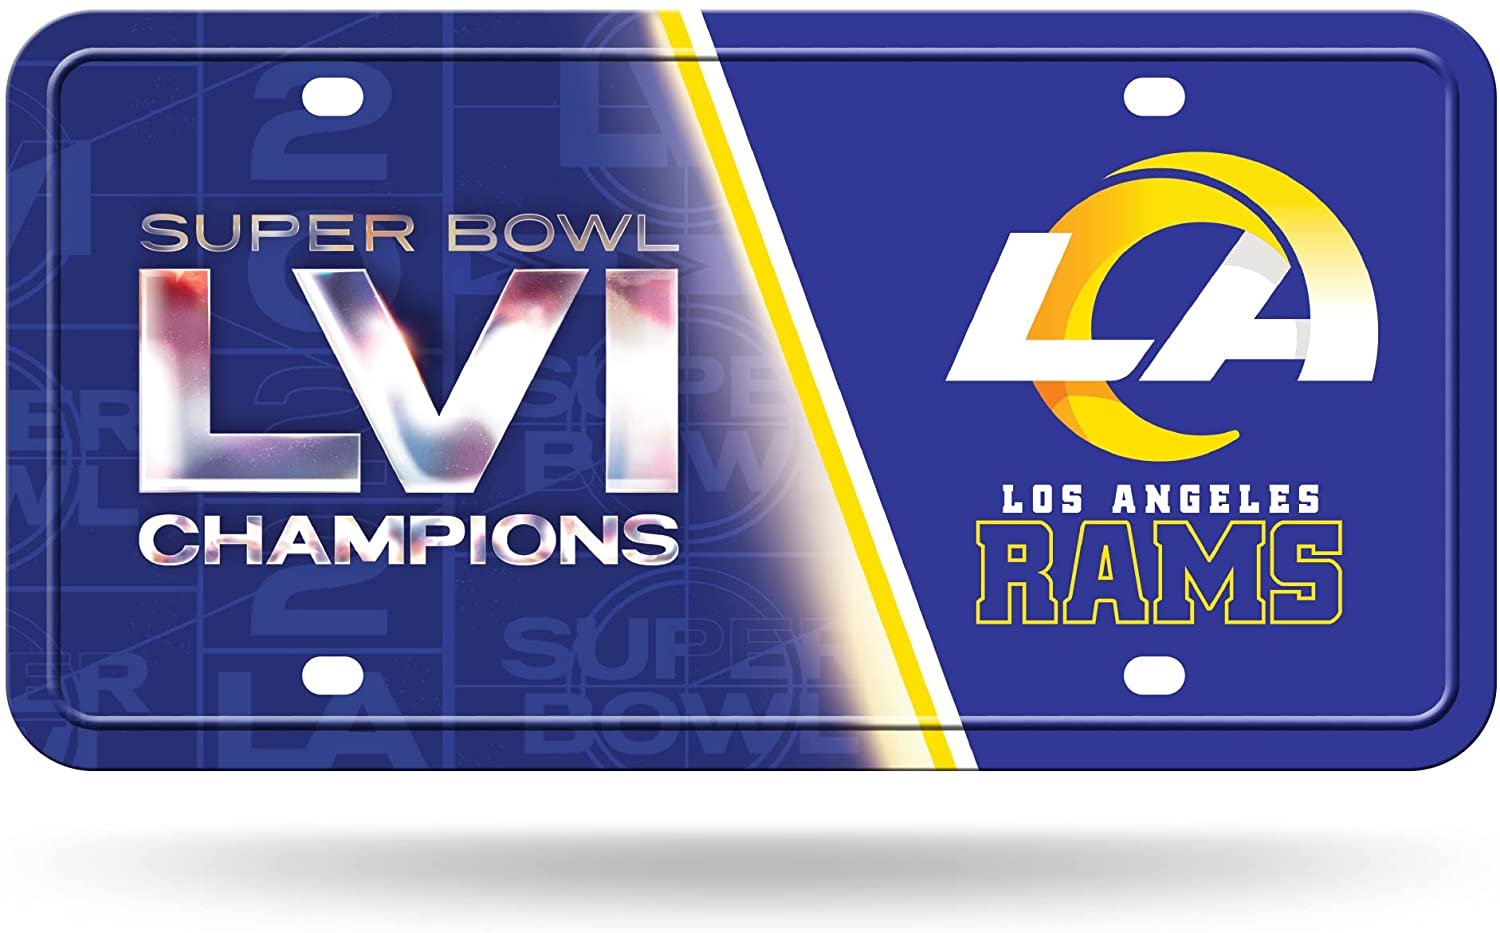 Rico Industries Super Bowl LV Champions Tampa Bay Buccaneers Premium 2 Hole  Chrome License Plate Frame for Cars, Vans, RV's. Show Your Team Pride at